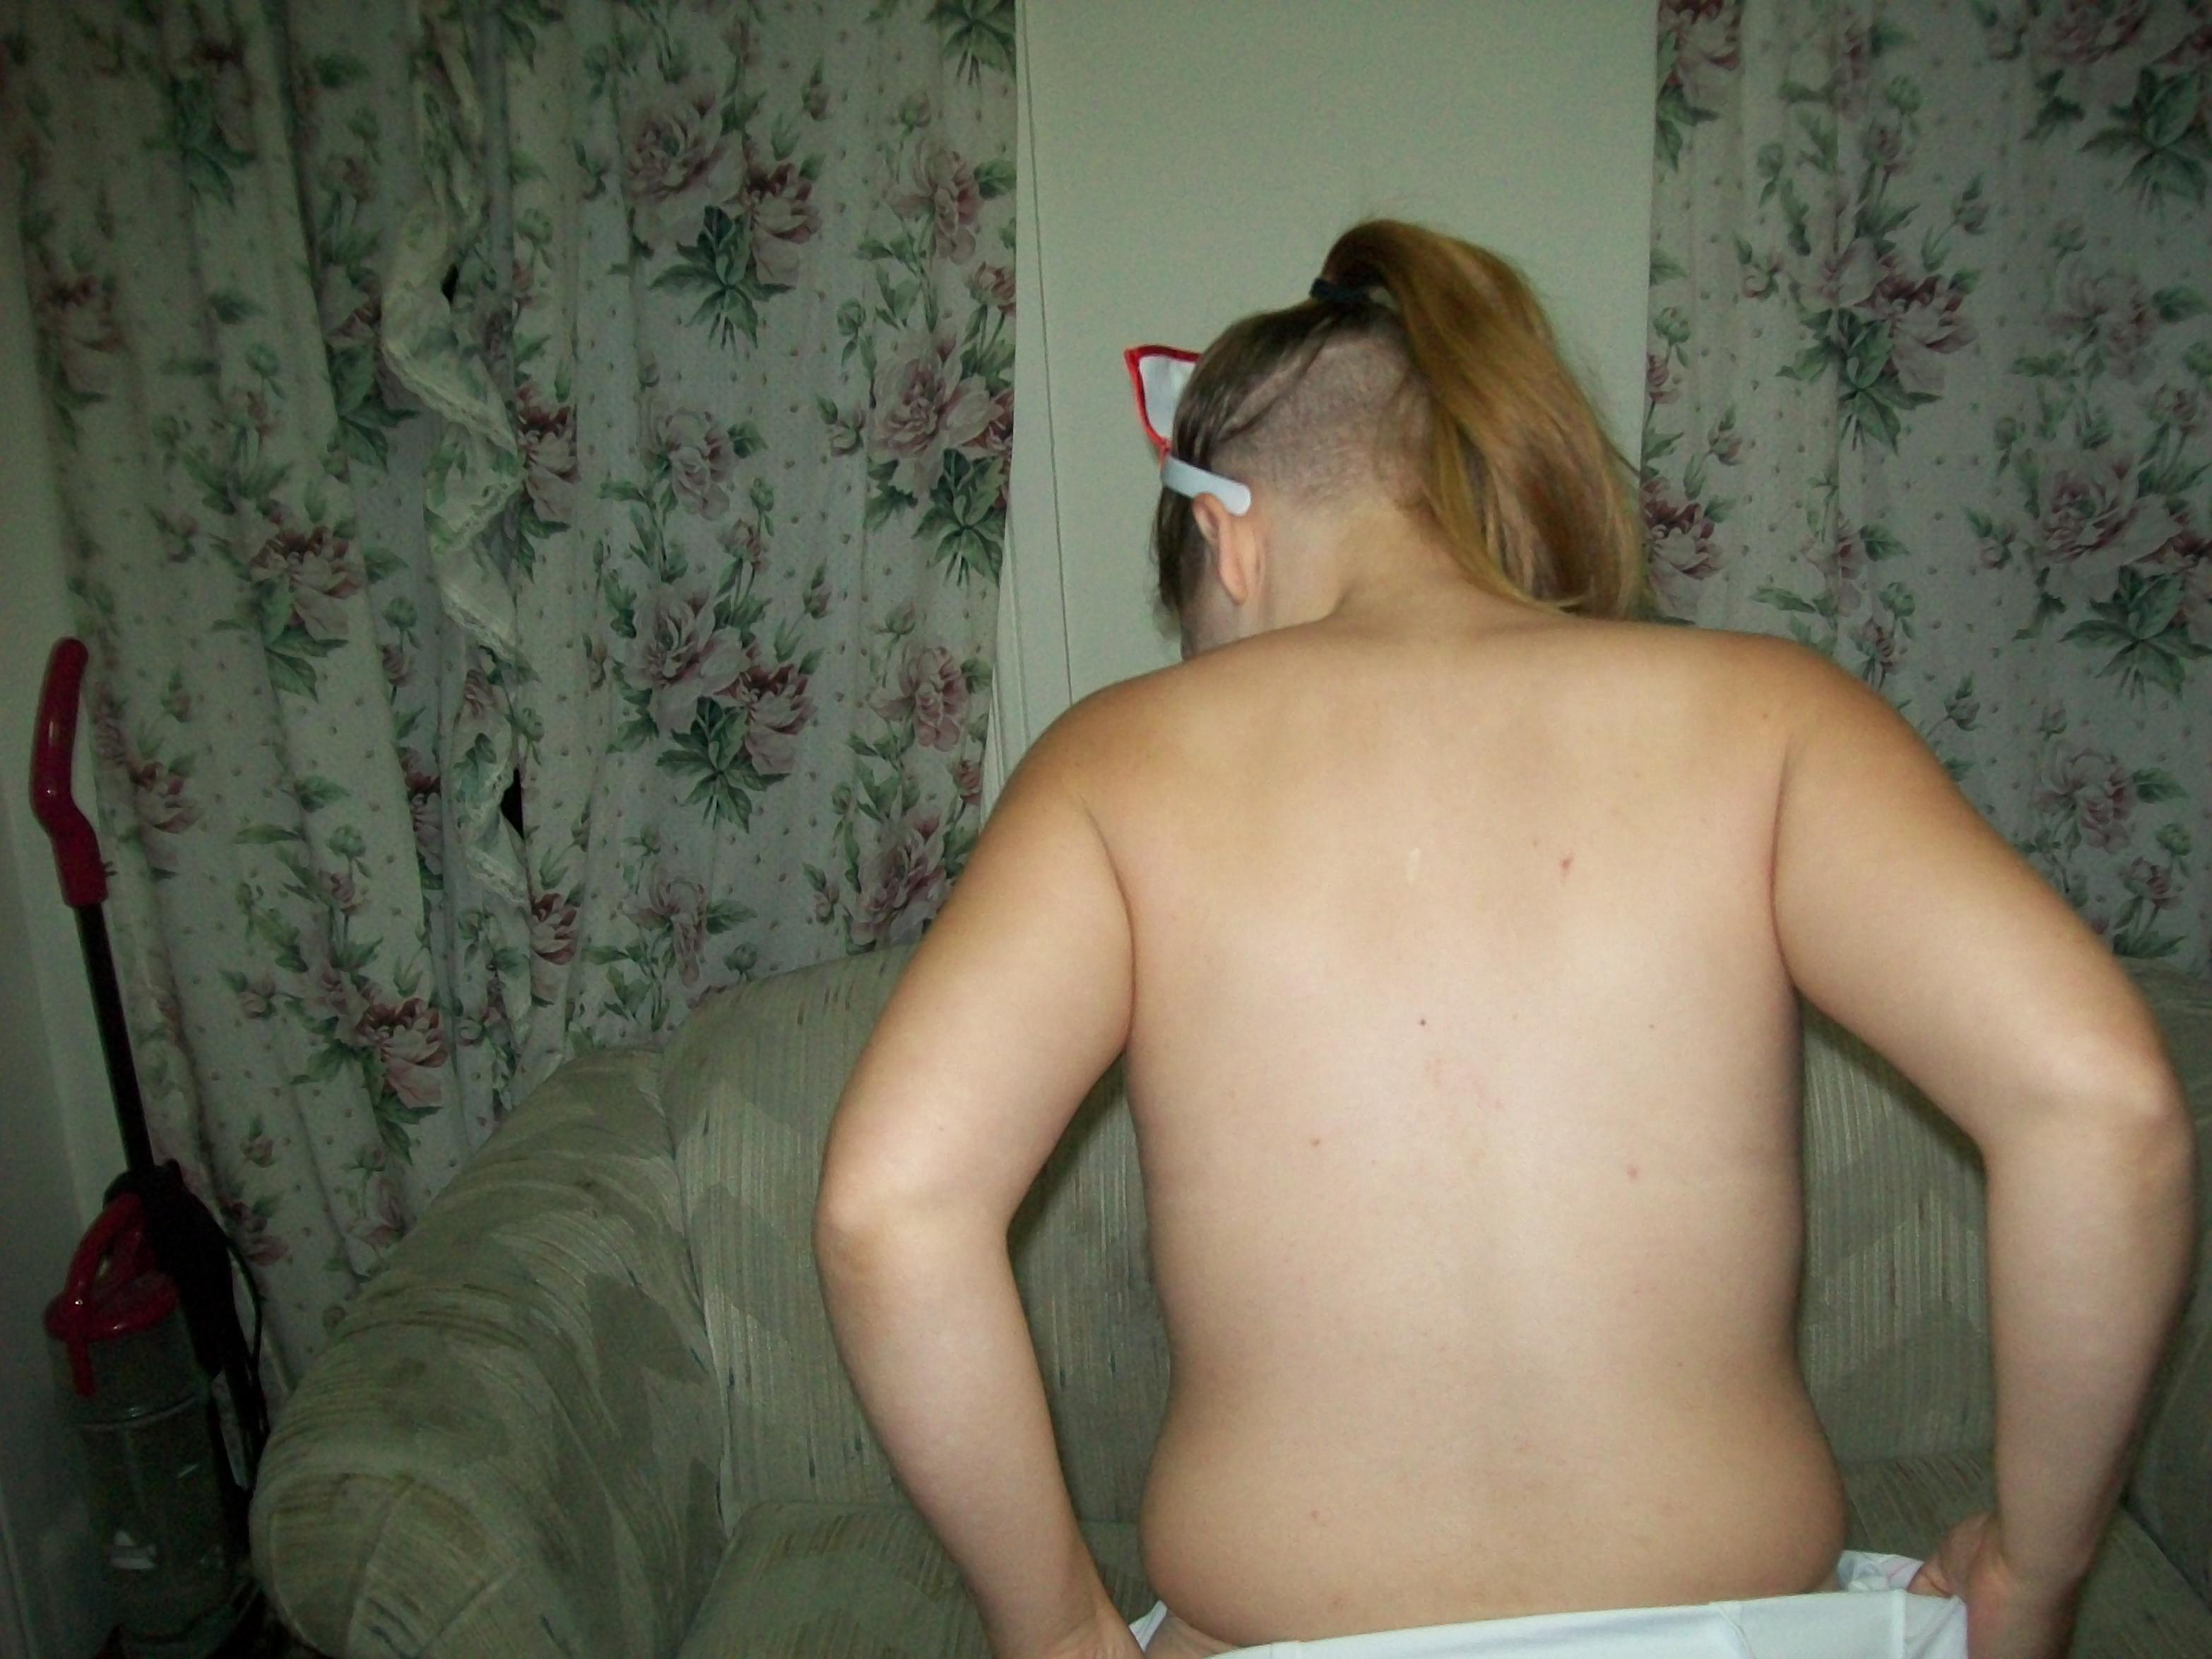 Babes with Undercut/BuzzcutSide Cut Bald and Partially Shaved Headside shave pixie bob hair fetish Page 5 Freeones Forum